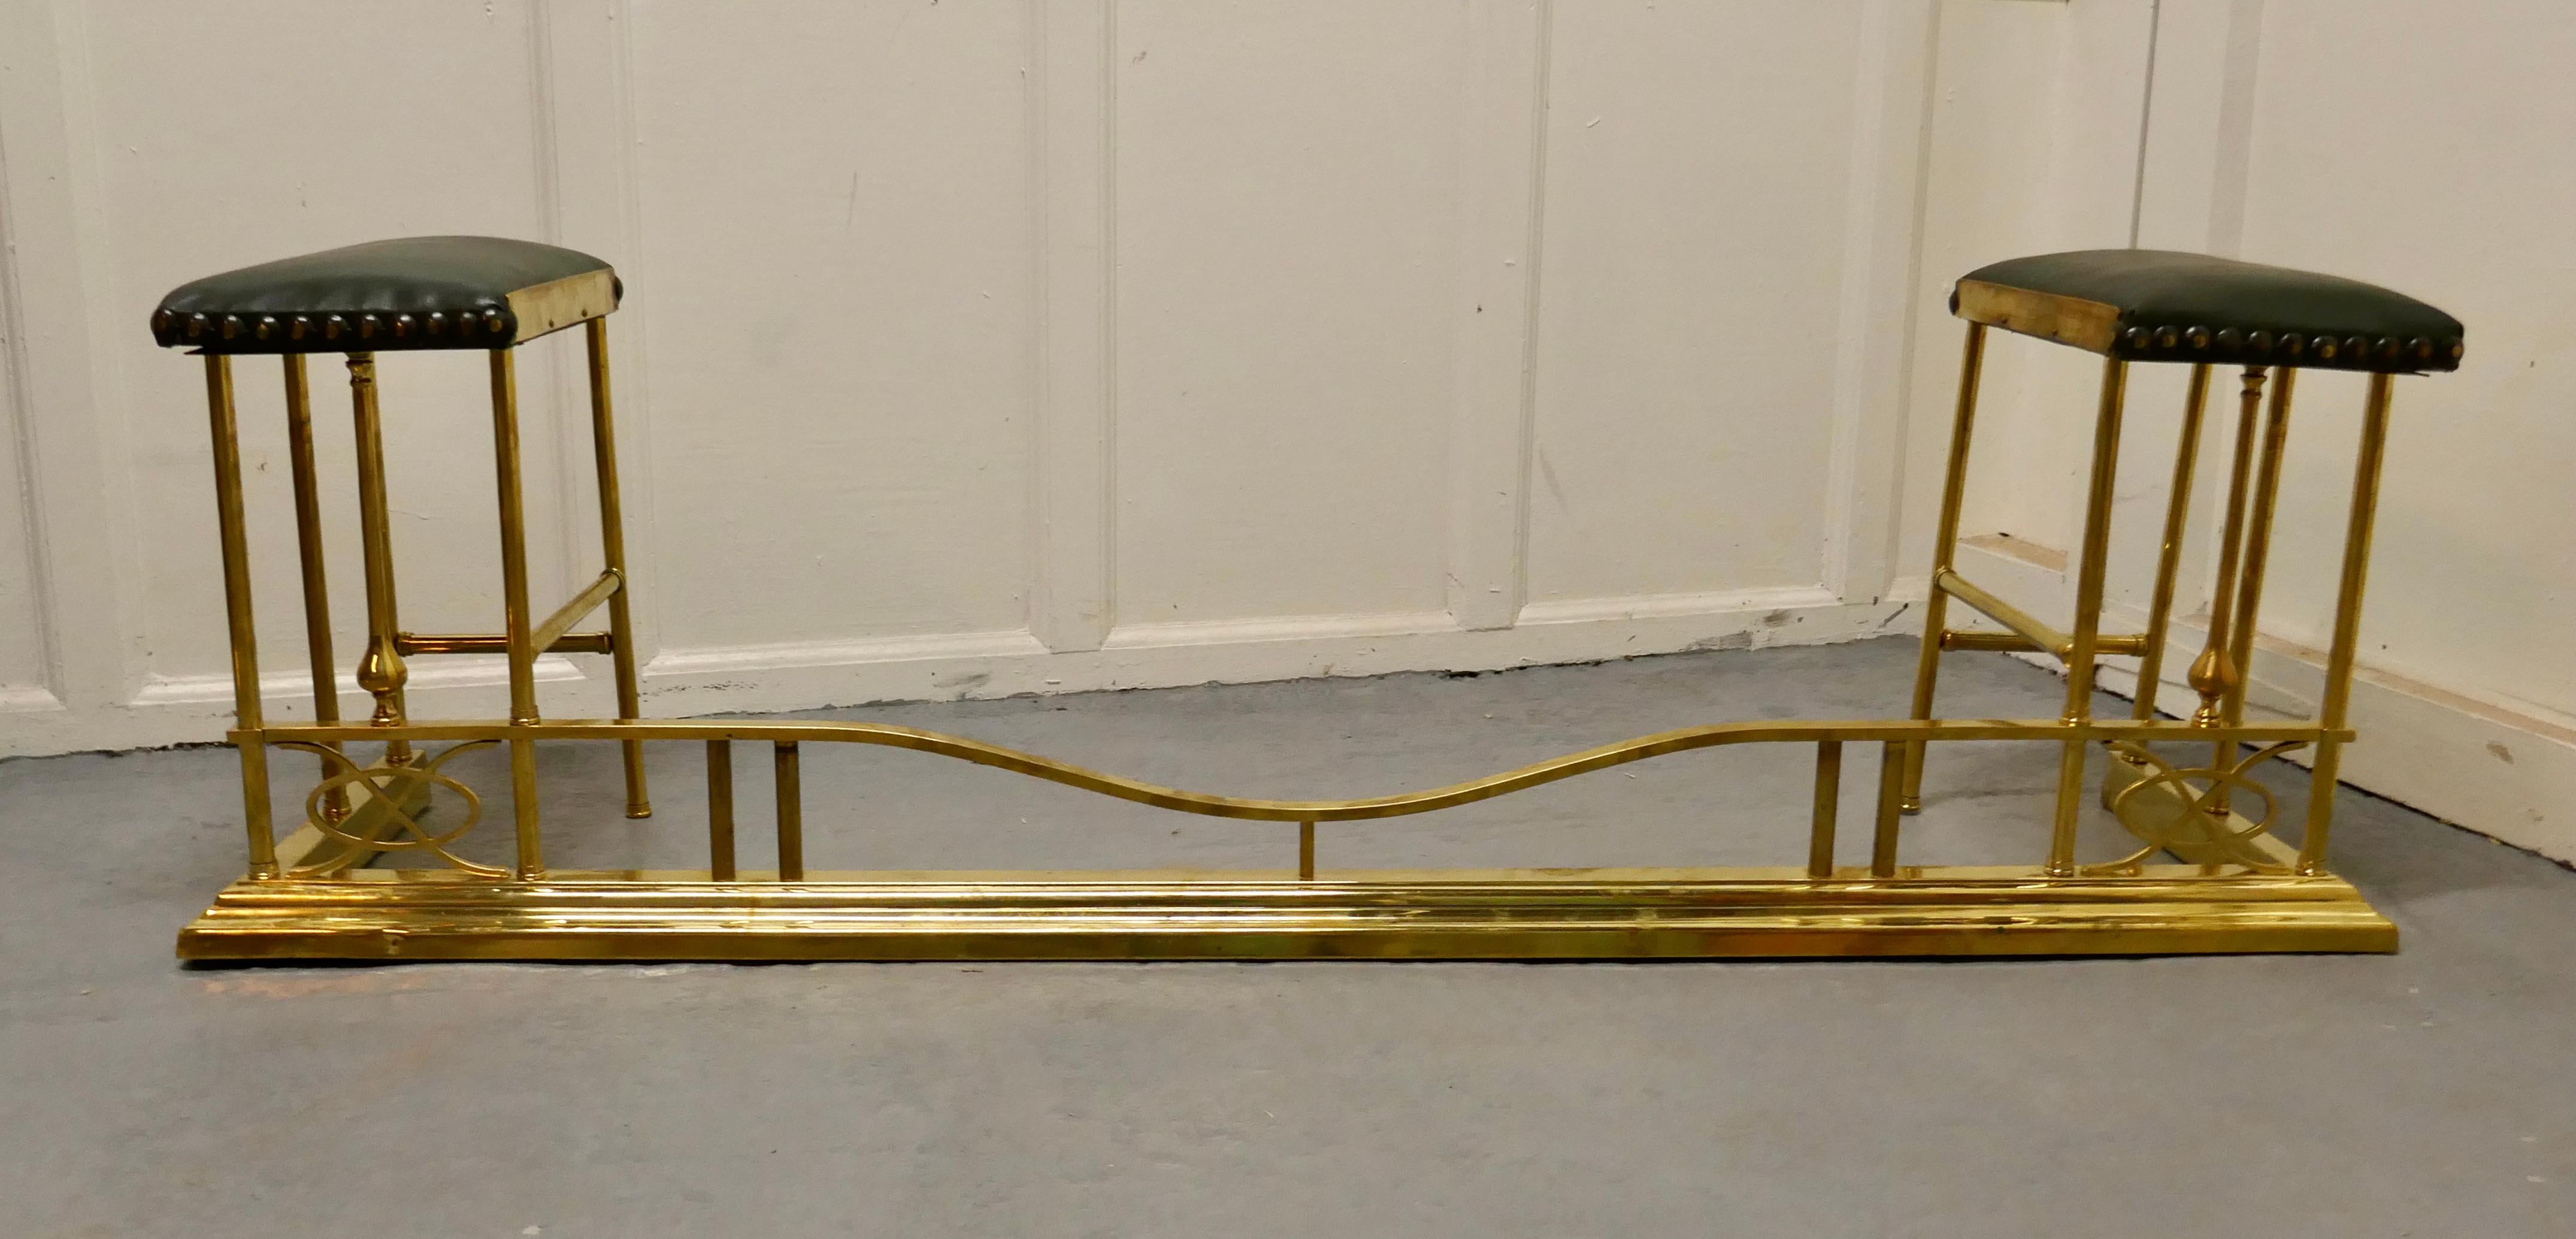 Dainty brass and green leather club fender

This is an dainty piece of country cottage furniture and suited to a cottage or bedroom location, the fender is in brass with studded leather seats
The fender is in good condition
The fender is 17.5” high,